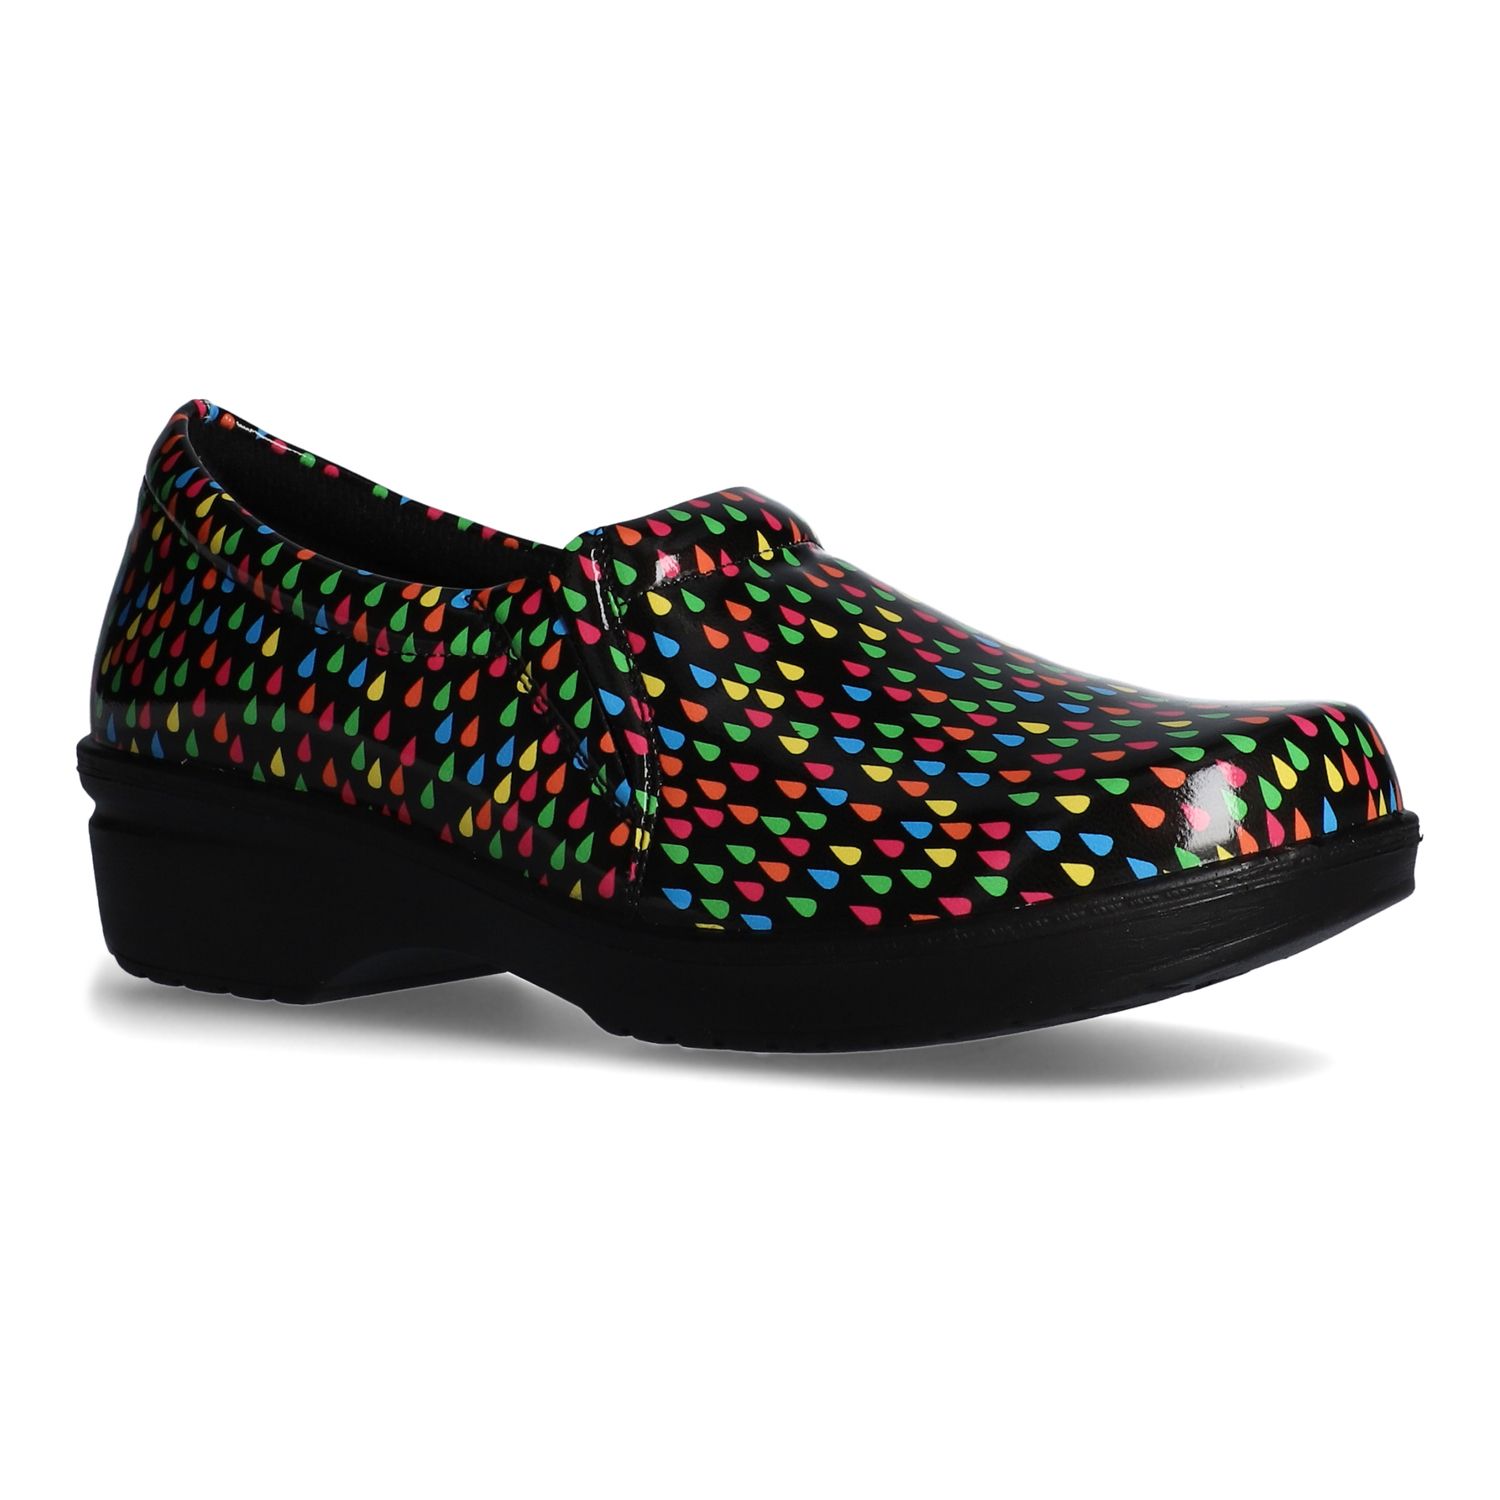 Image for Easy Street Easy Works by Tiffany Women's Slip-Resistant Clogs at Kohl's.